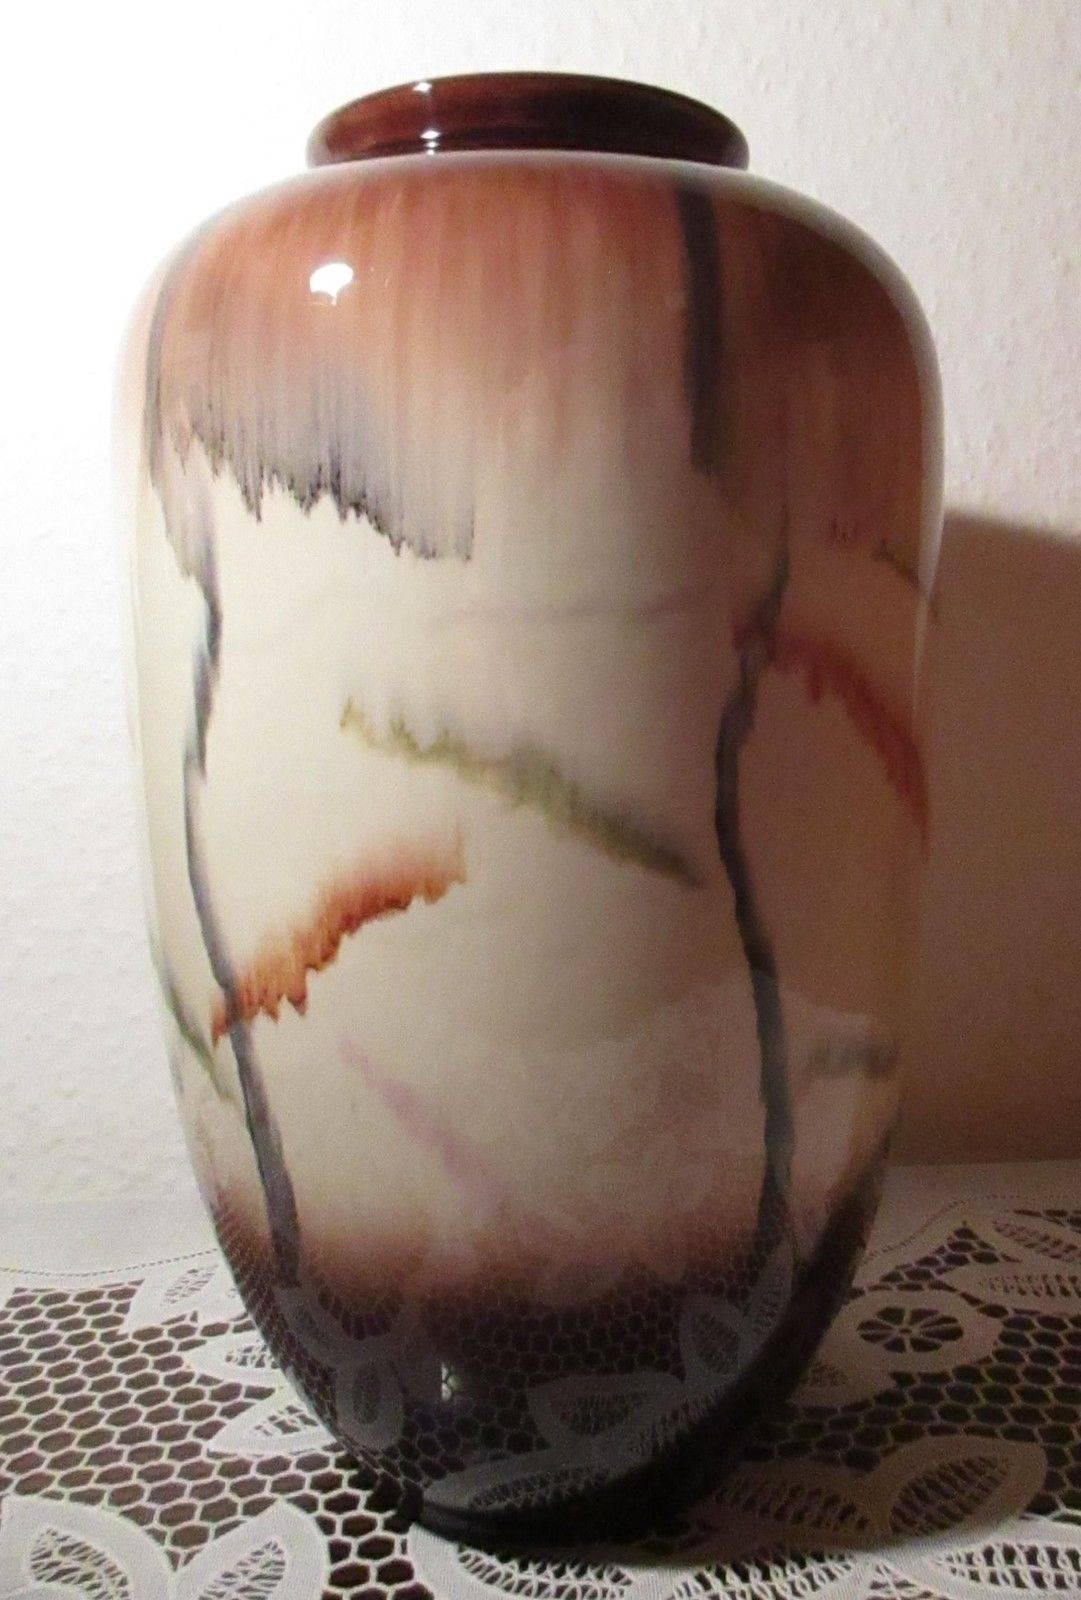 German Hand Made Hand Glazed Classic Vase in Rich Earth Tones, 1940